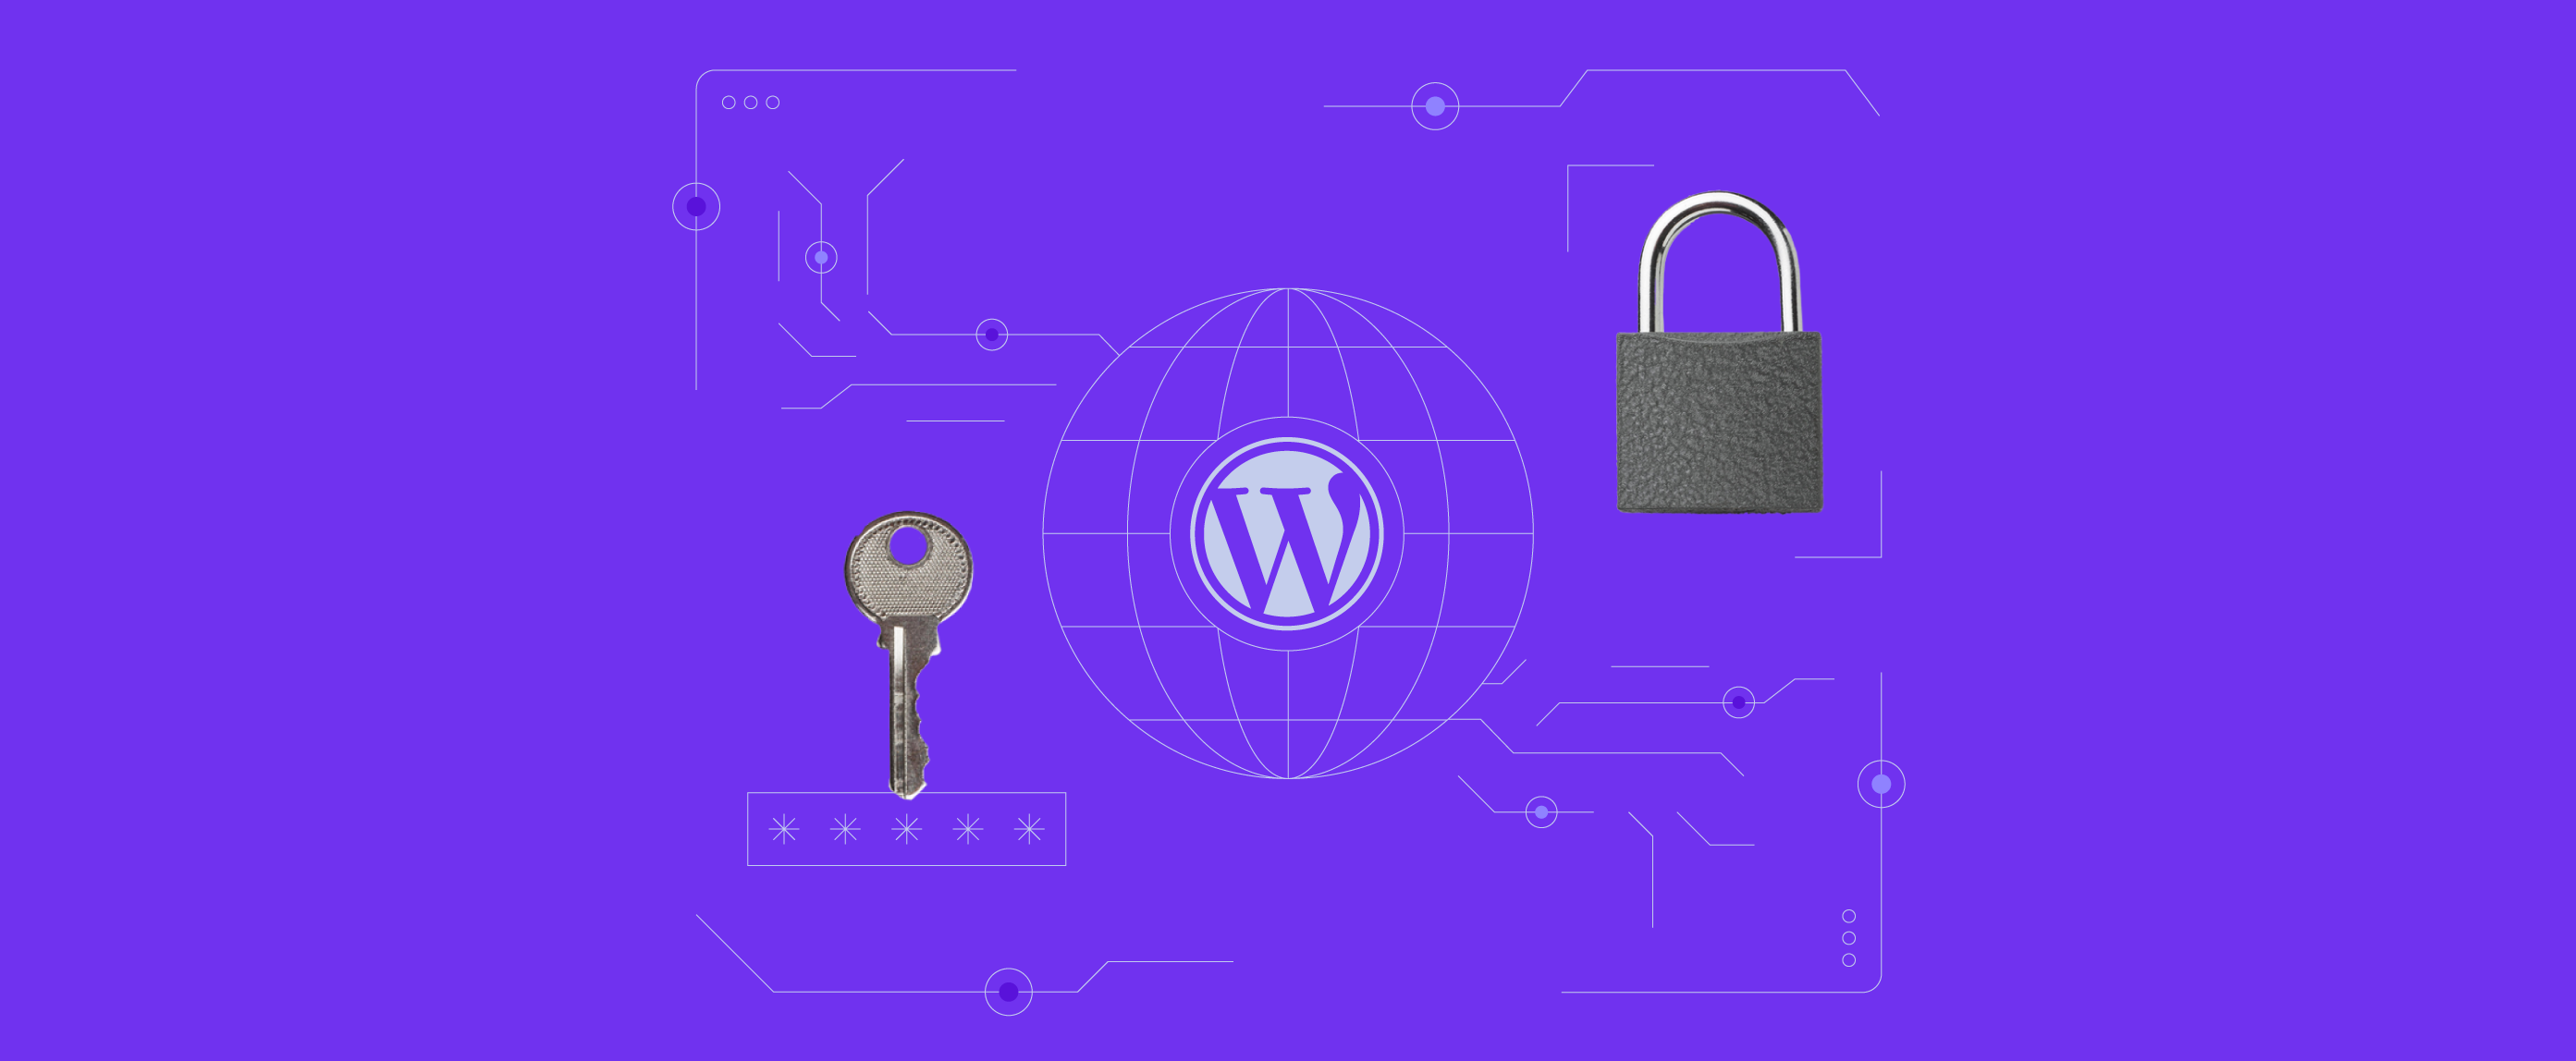 WordPress Security in 2022 – What We Do to Protect Our Users